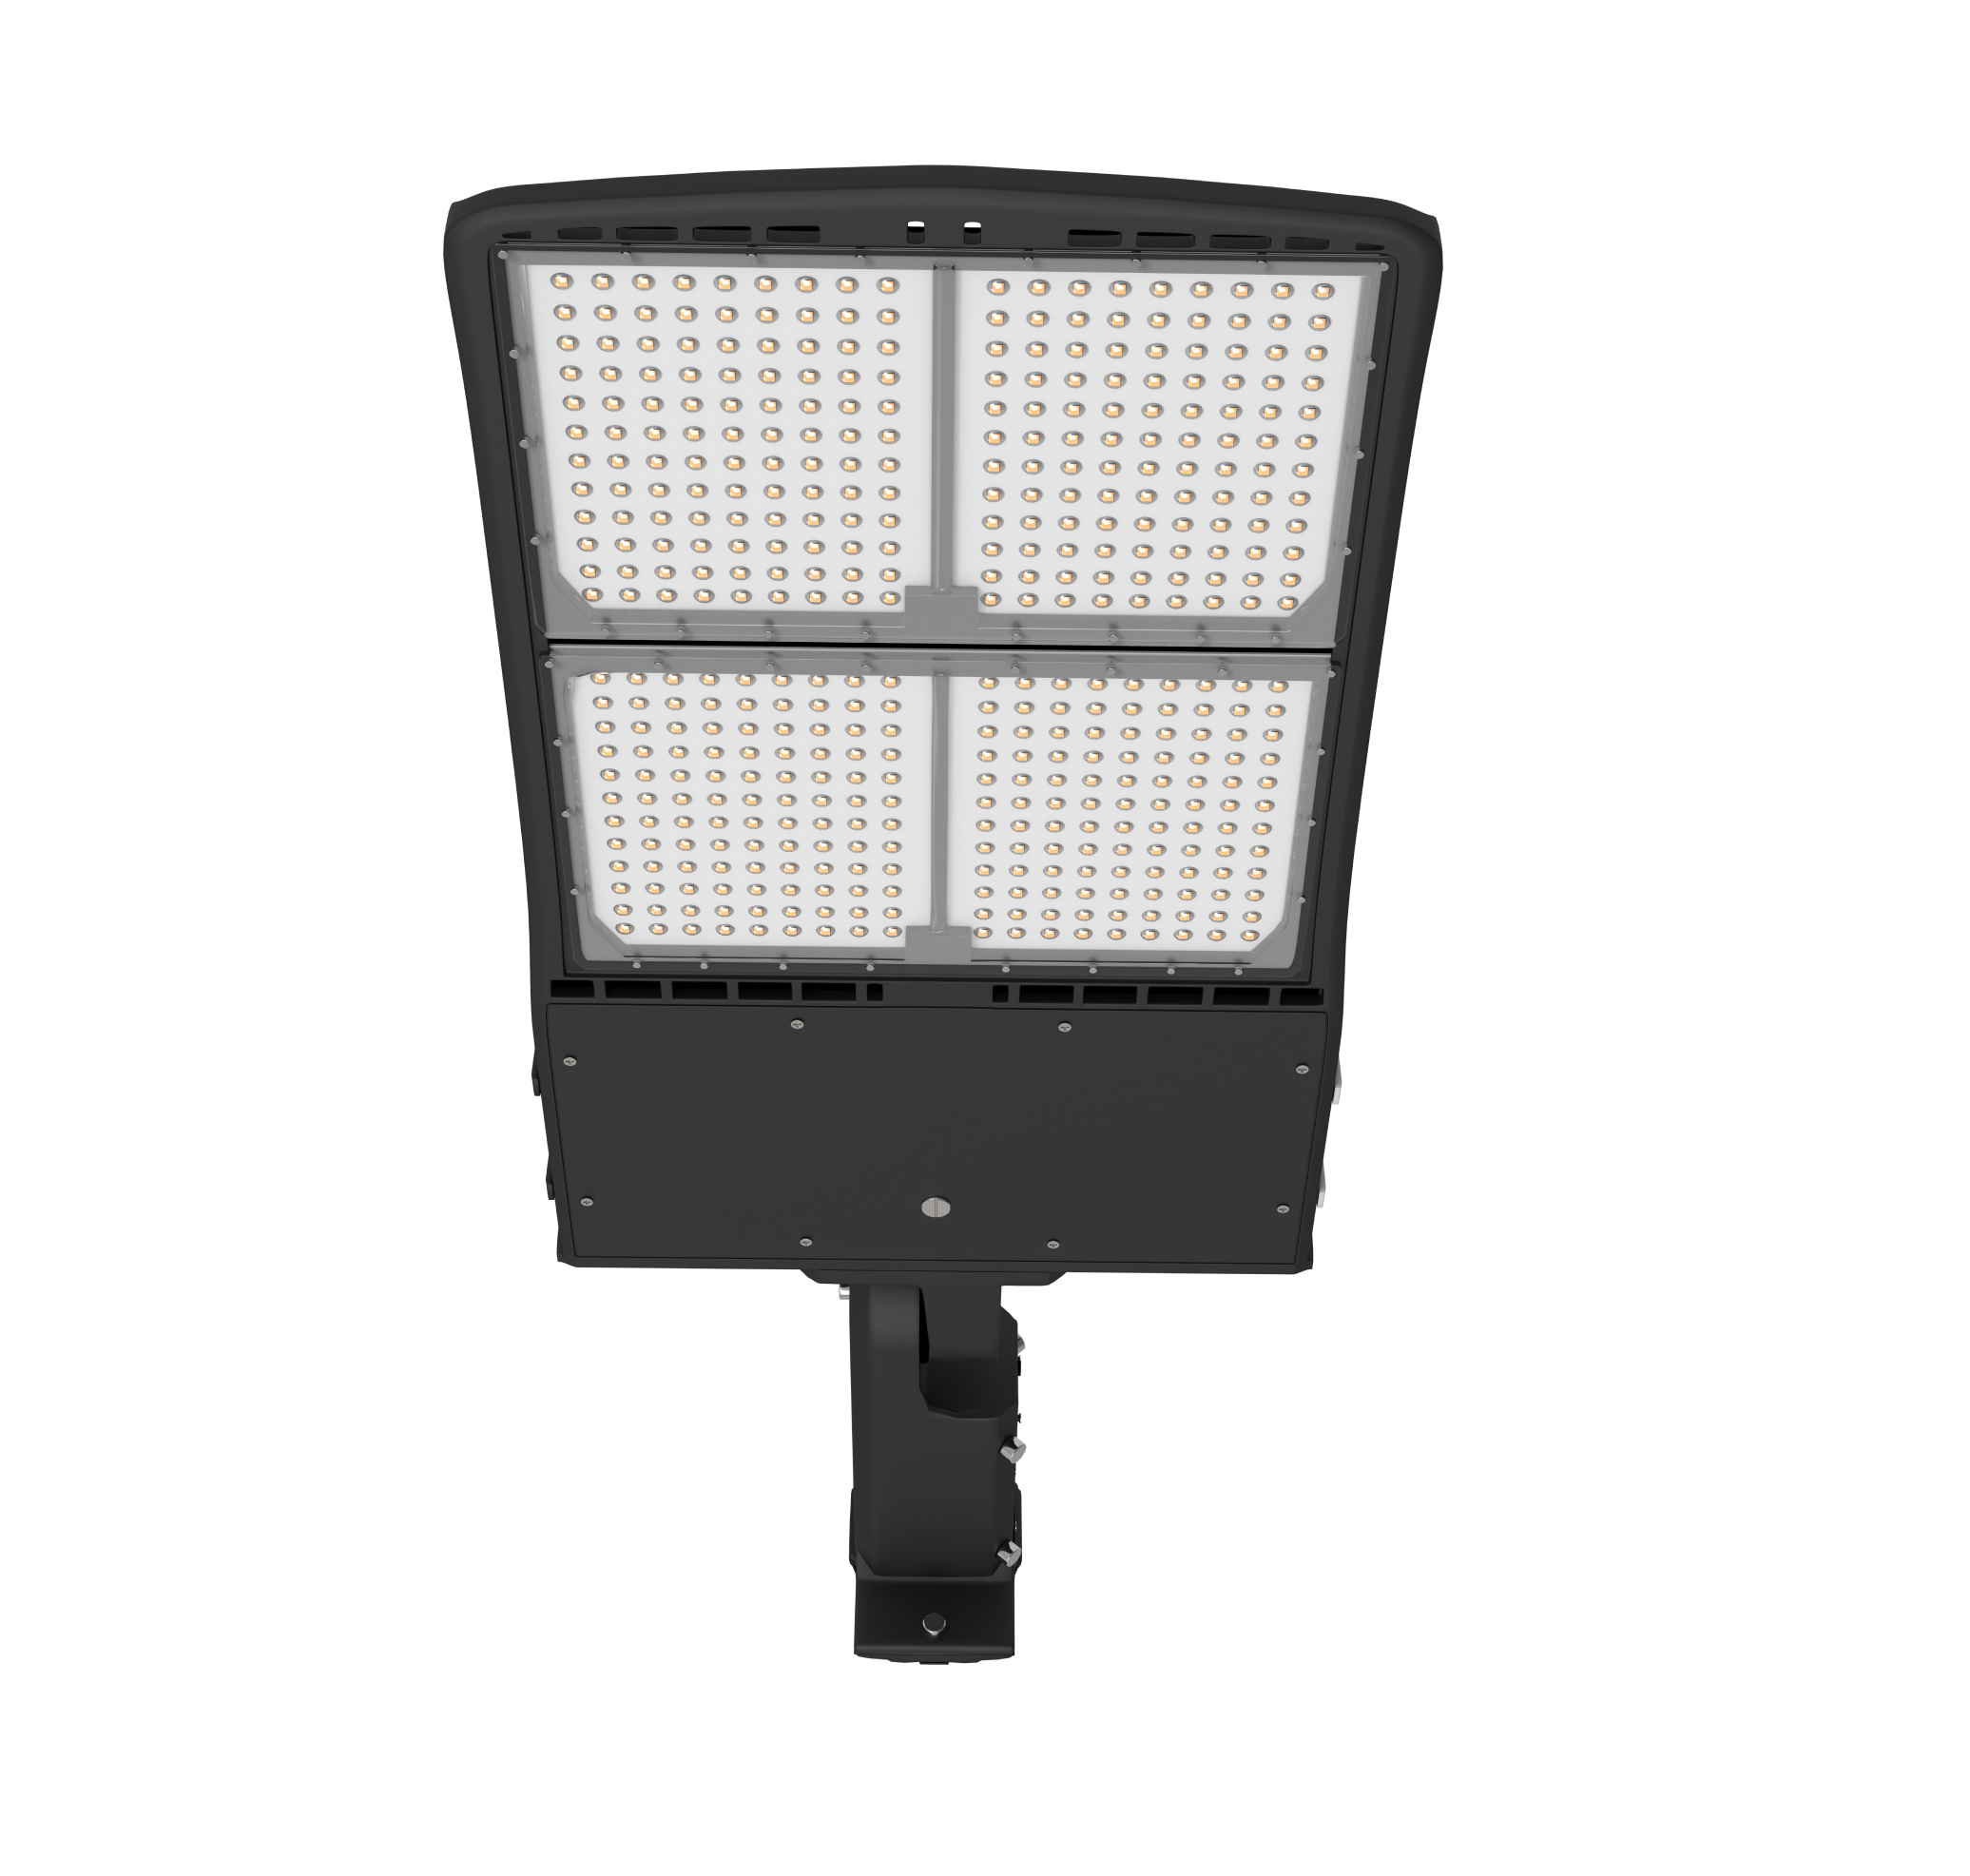 LED Parking Lot Light With Dusk to Dawn Photocell, 300W, 5700K, 42000LM, High Voltage 277-480V, IP65, Universal Mount, UL, DLC Listed, Bronze, Commercial Area Road Lighting